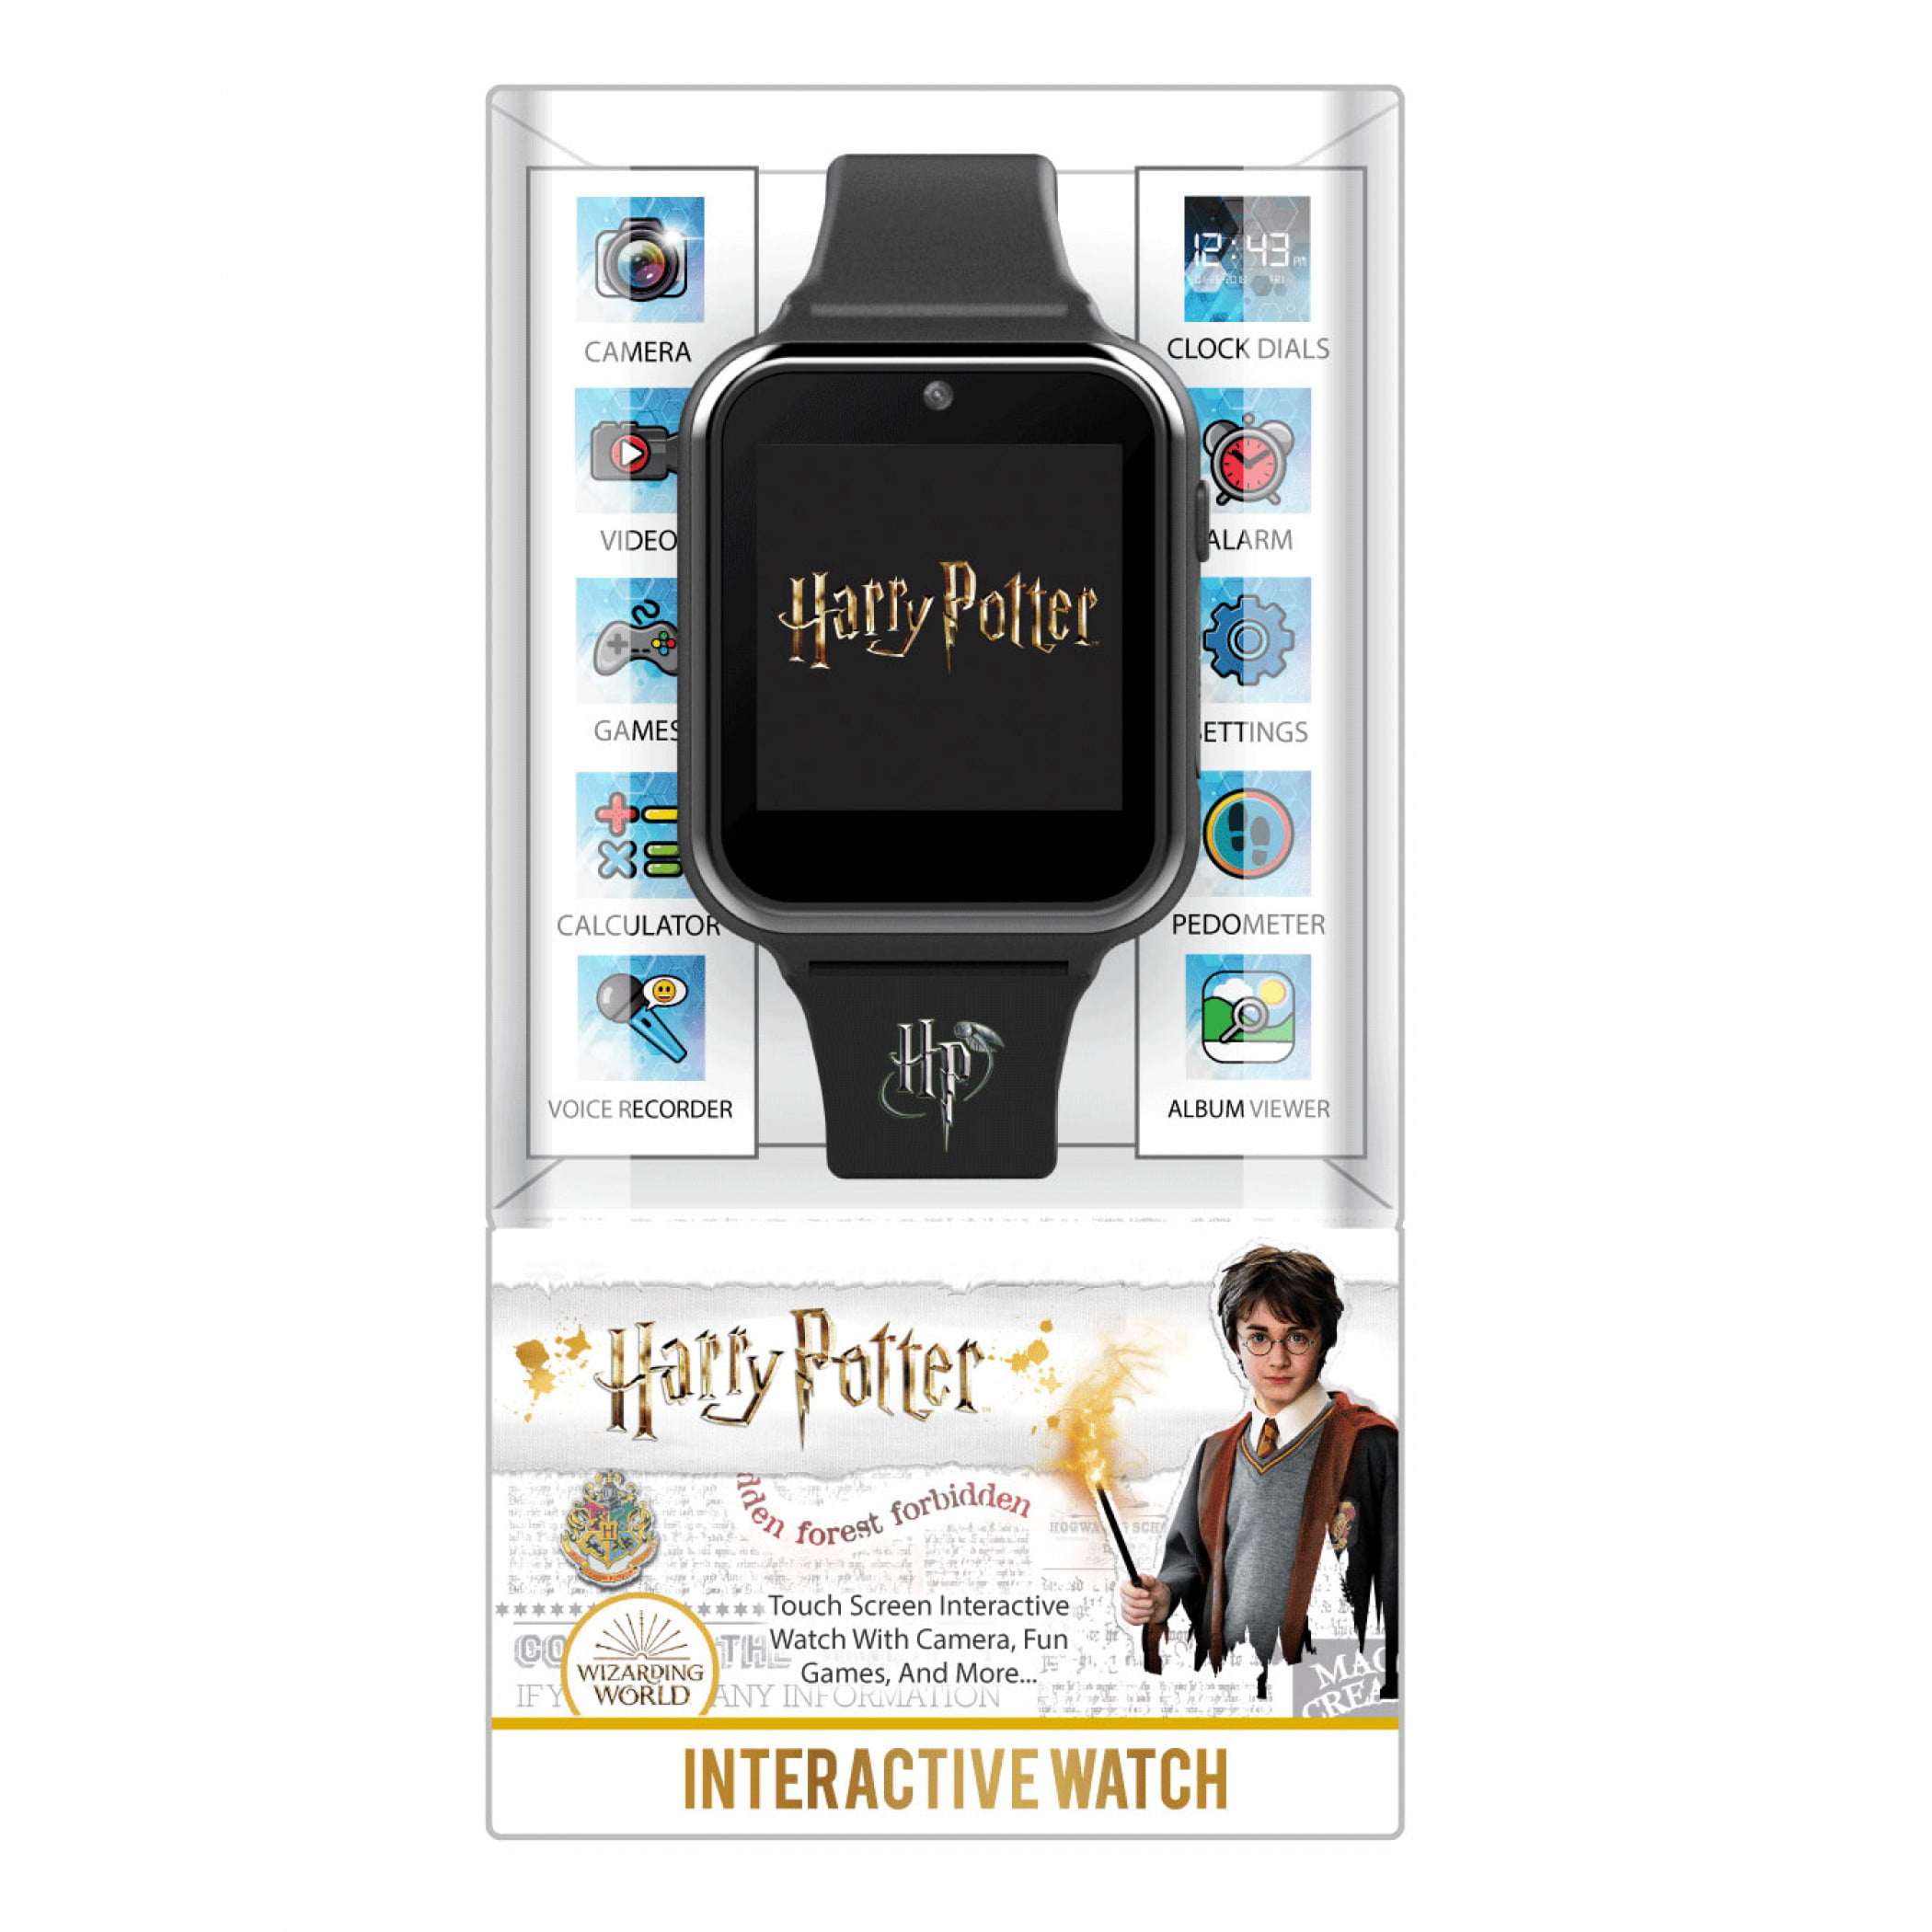  Accutime Kids Harry Potter Educational Learning Touchscreen  Black Smart Watch Toy with Black Strap for Girls, Boys, Toddlers - Selfie  Cam, Games, Alarm, Calculator, Pedometer (Model: HP4096AZ) : Toys & Games